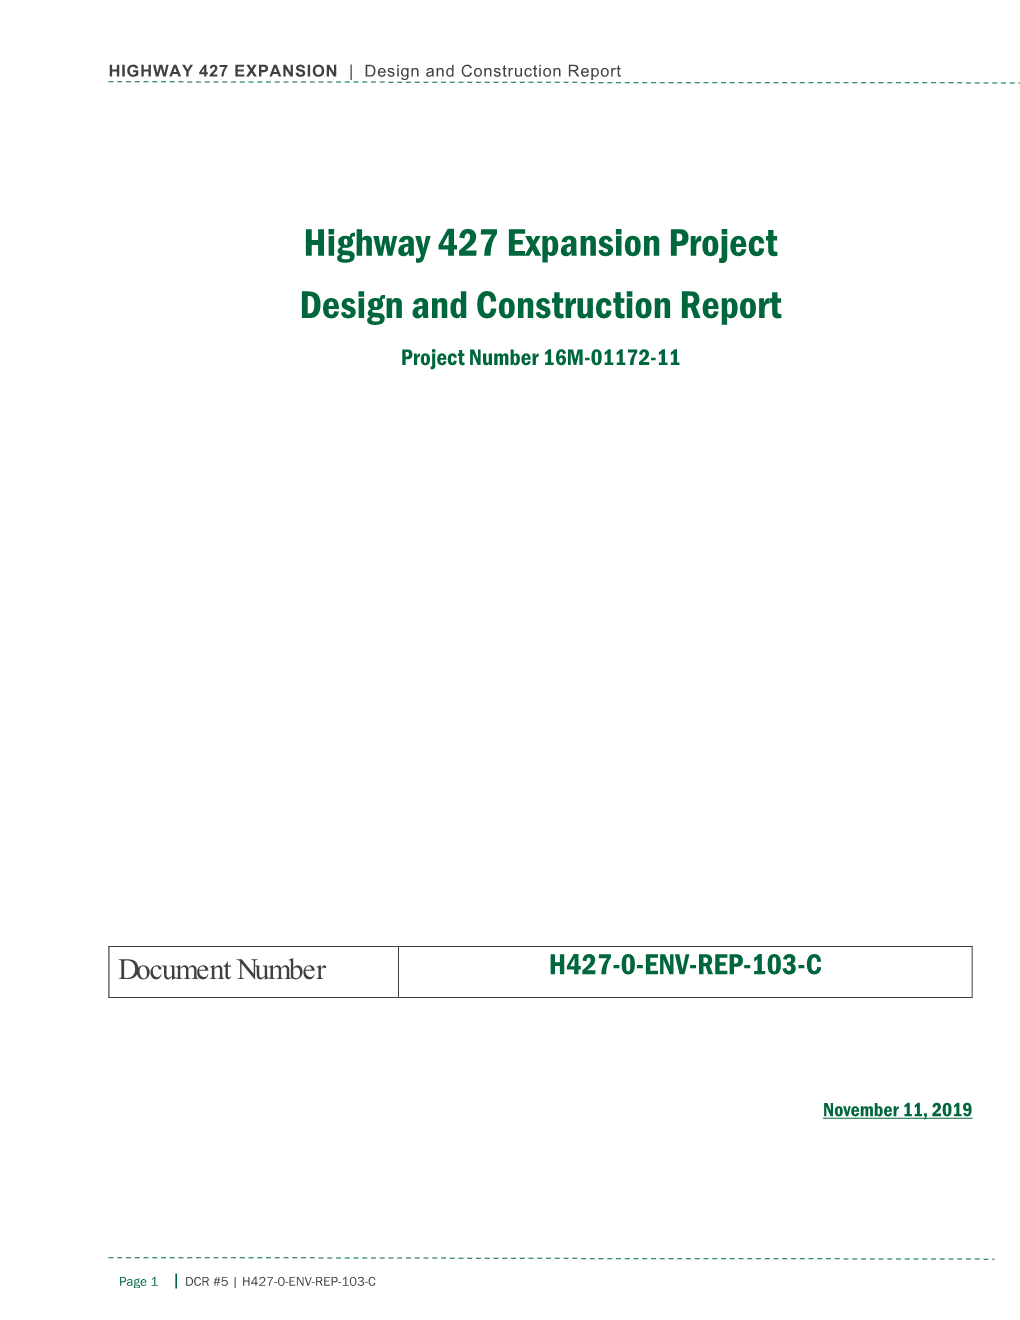 Highway 427 Expansion Project Design and Construction Report